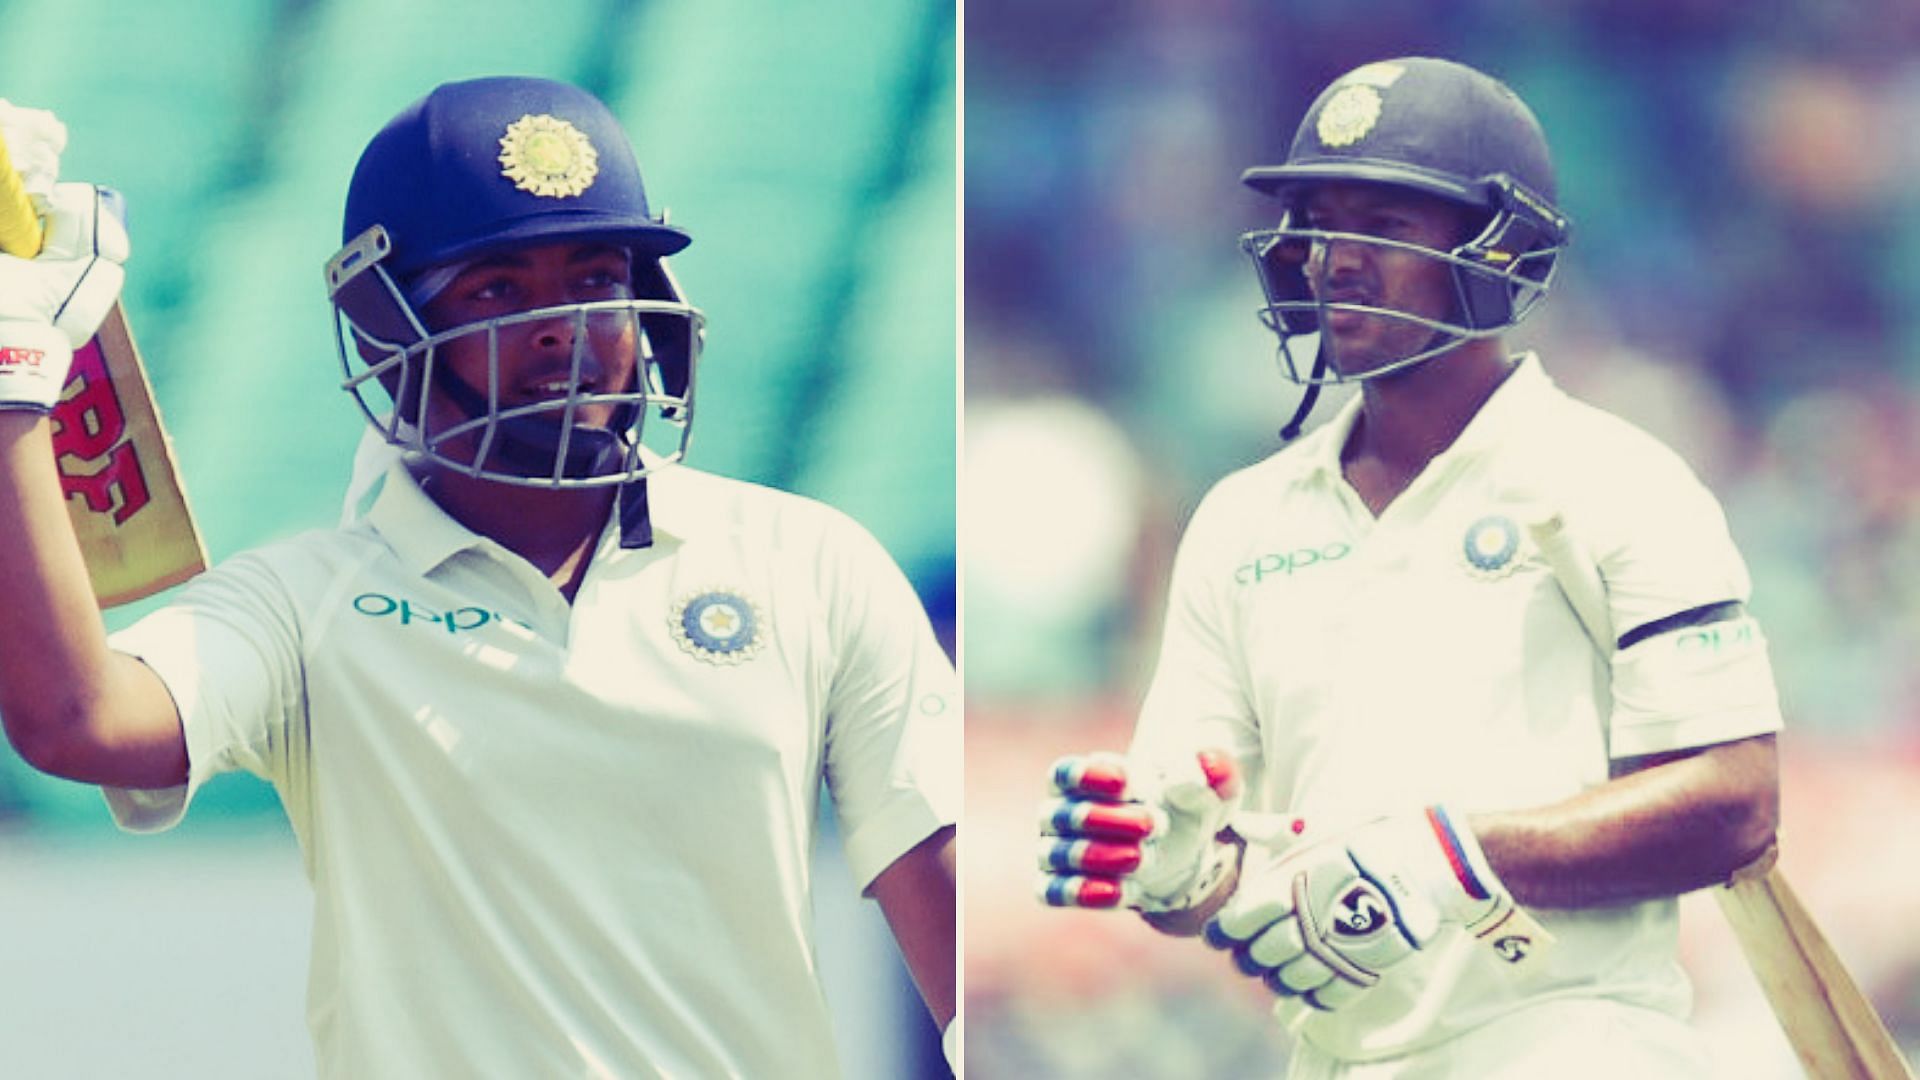 Prithvi Shaw (left) and Mayank Agarwal were among the notable absentees from the BCCI’s list of 25 centrally-contracted Indian cricketers for 2018/19.